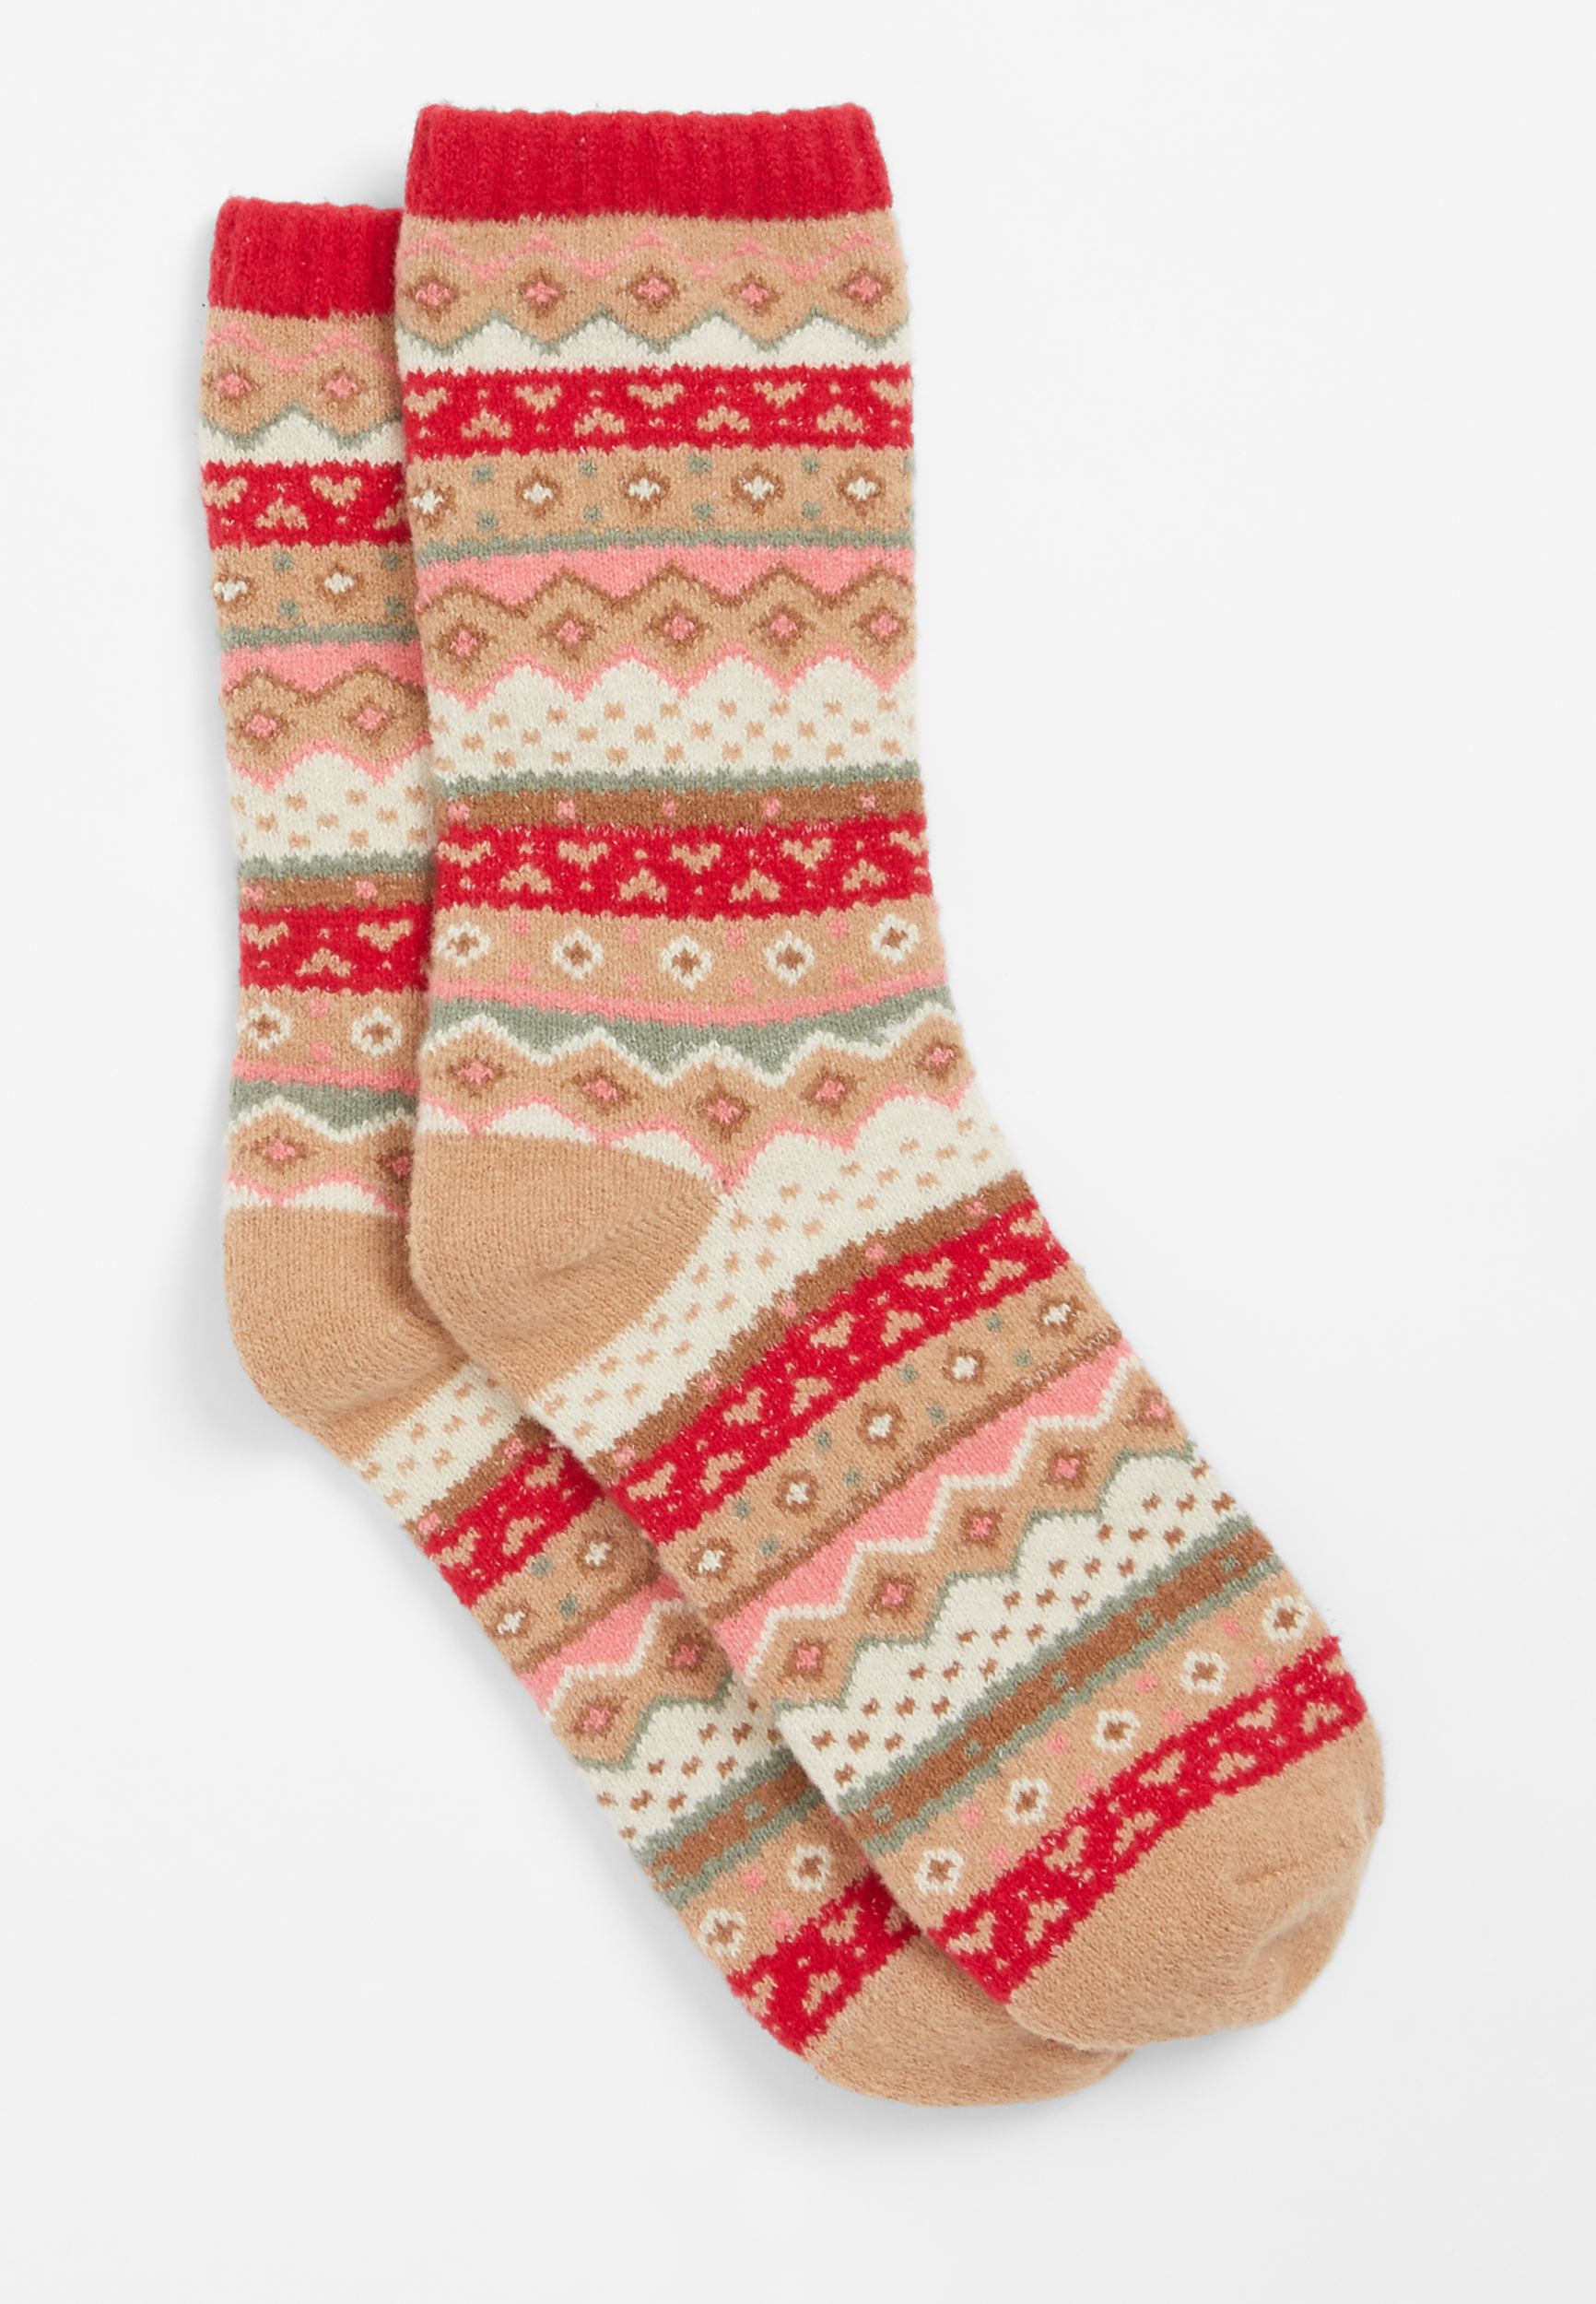 Red and Tan Fair Isle Crew Socks | maurices